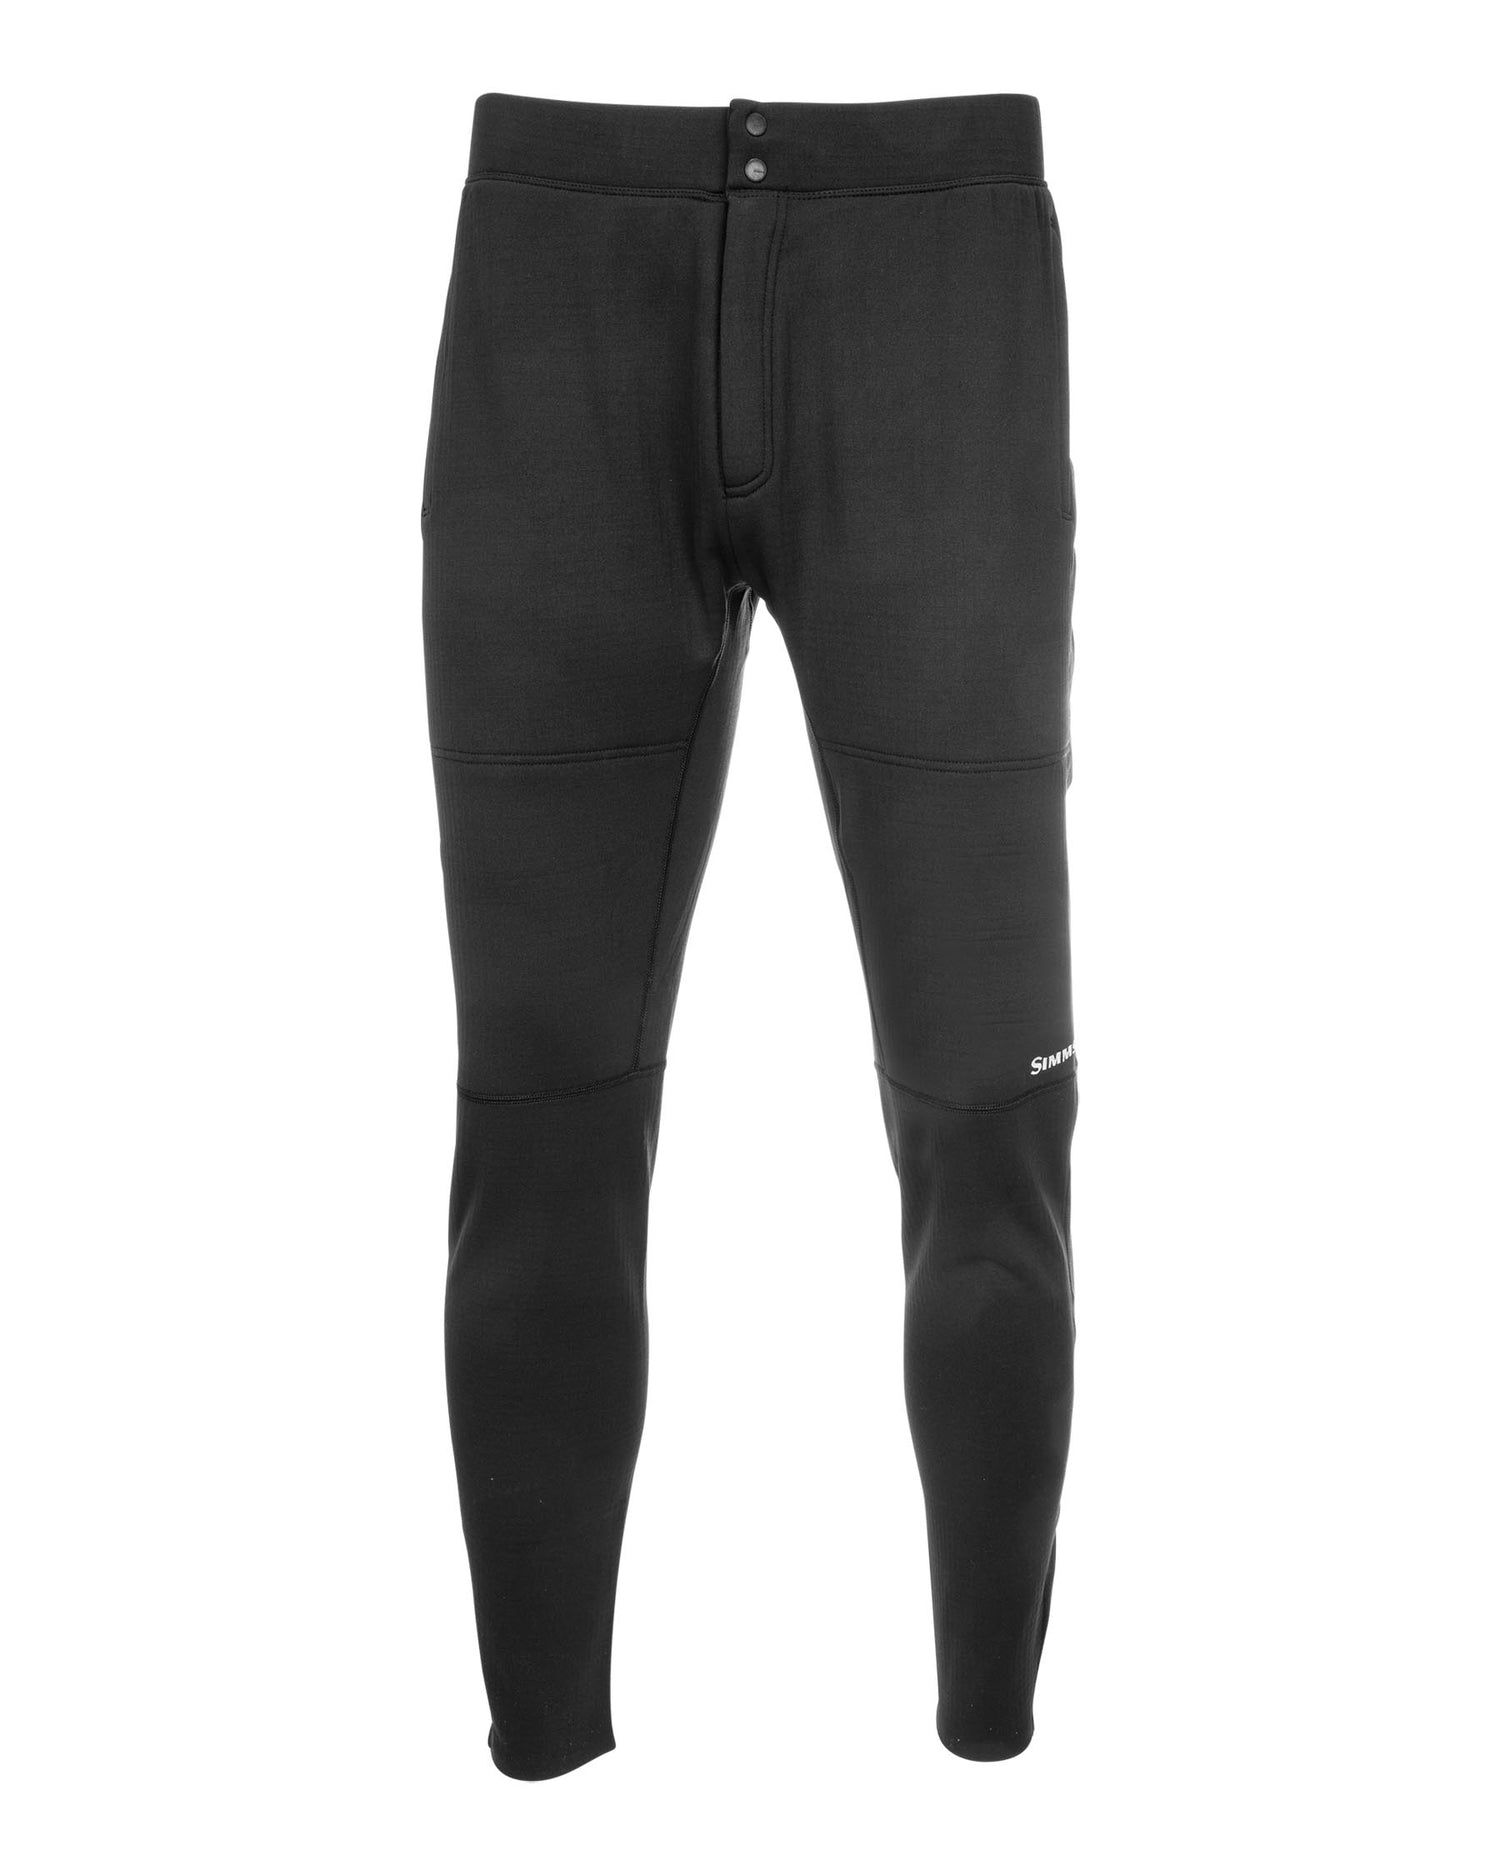 NEW* Men's XL Heavyweight Thermal Pants - All in Motion